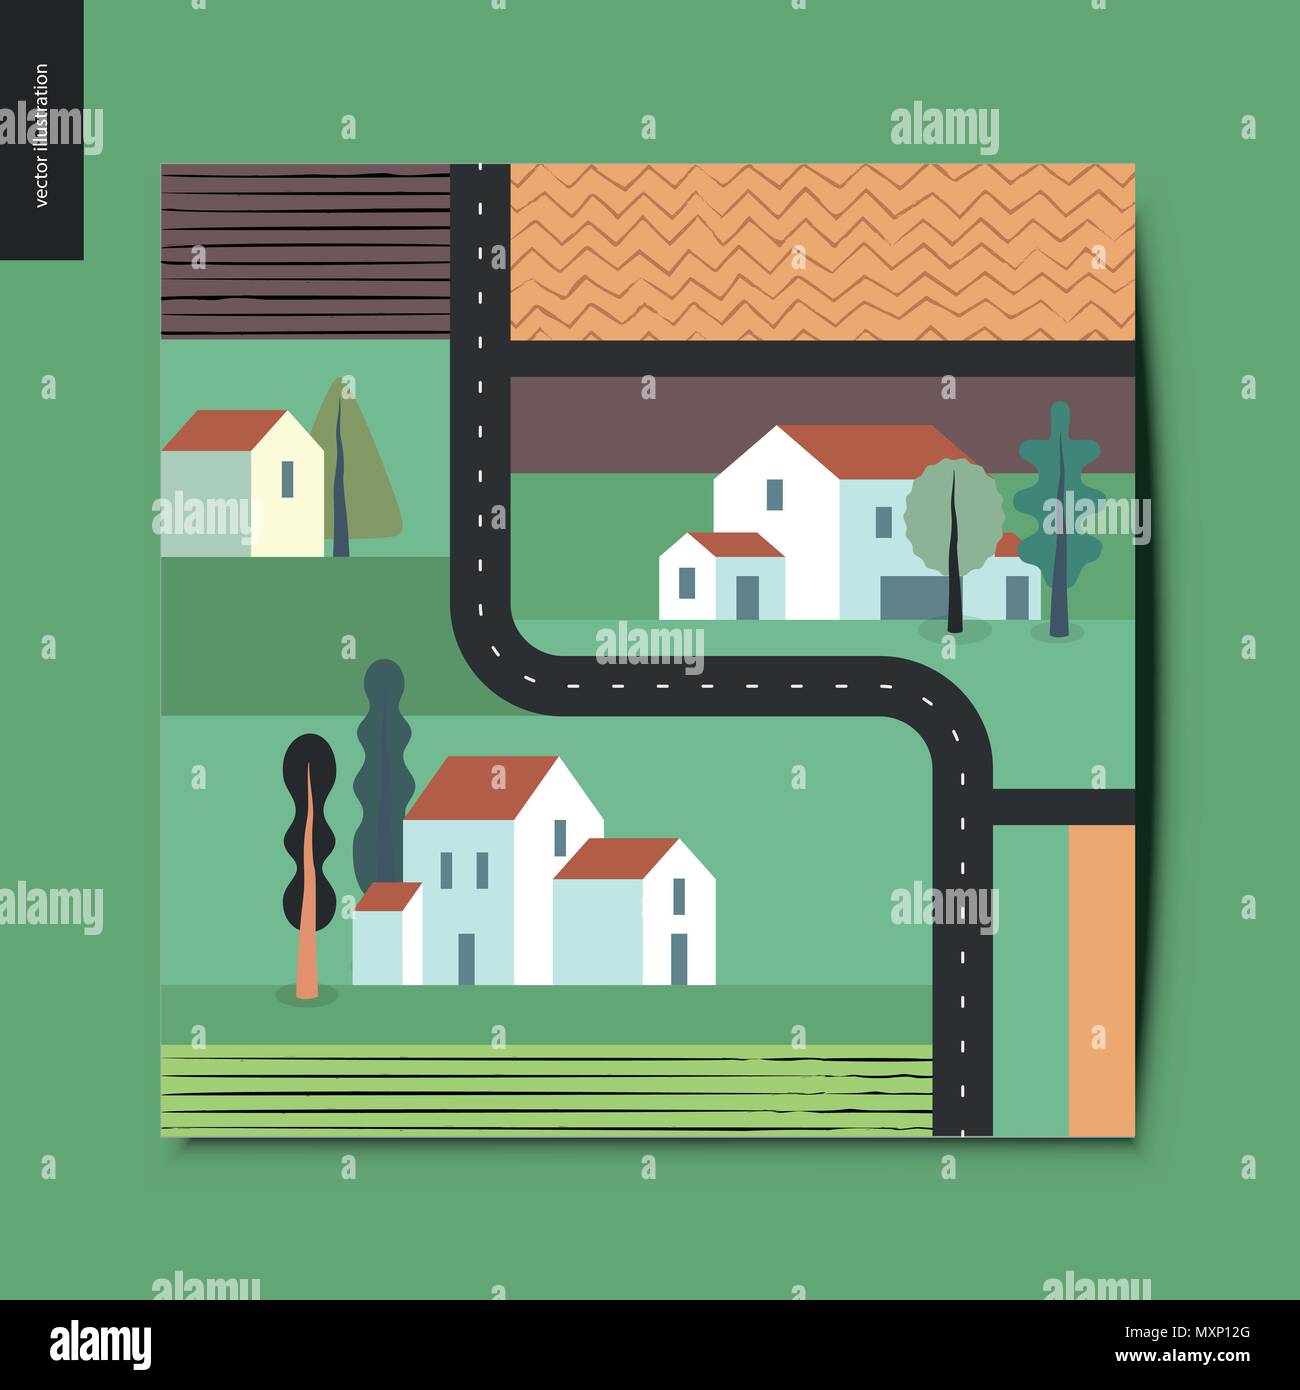 Simple things - top view, satellite shoot of a out-of-town street with detached country houses, trees, fields and plowed fields around, and asphalt bl Stock Vector